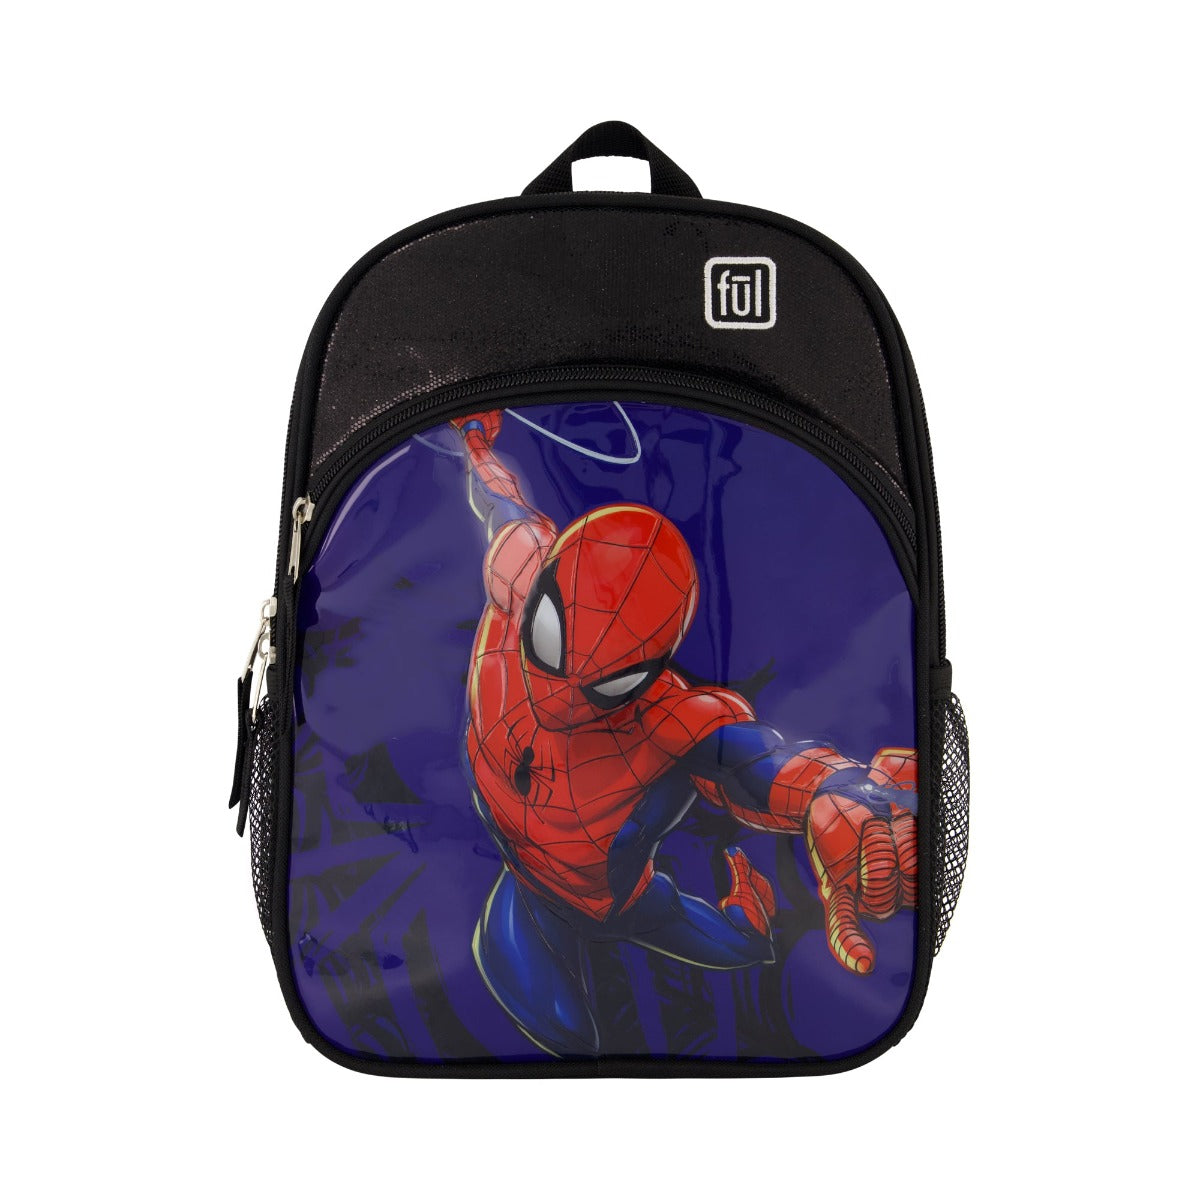 Blue Ful Marvel Spiderman Web matching 2 piece set - 13" carry-on kids backpack for traveling